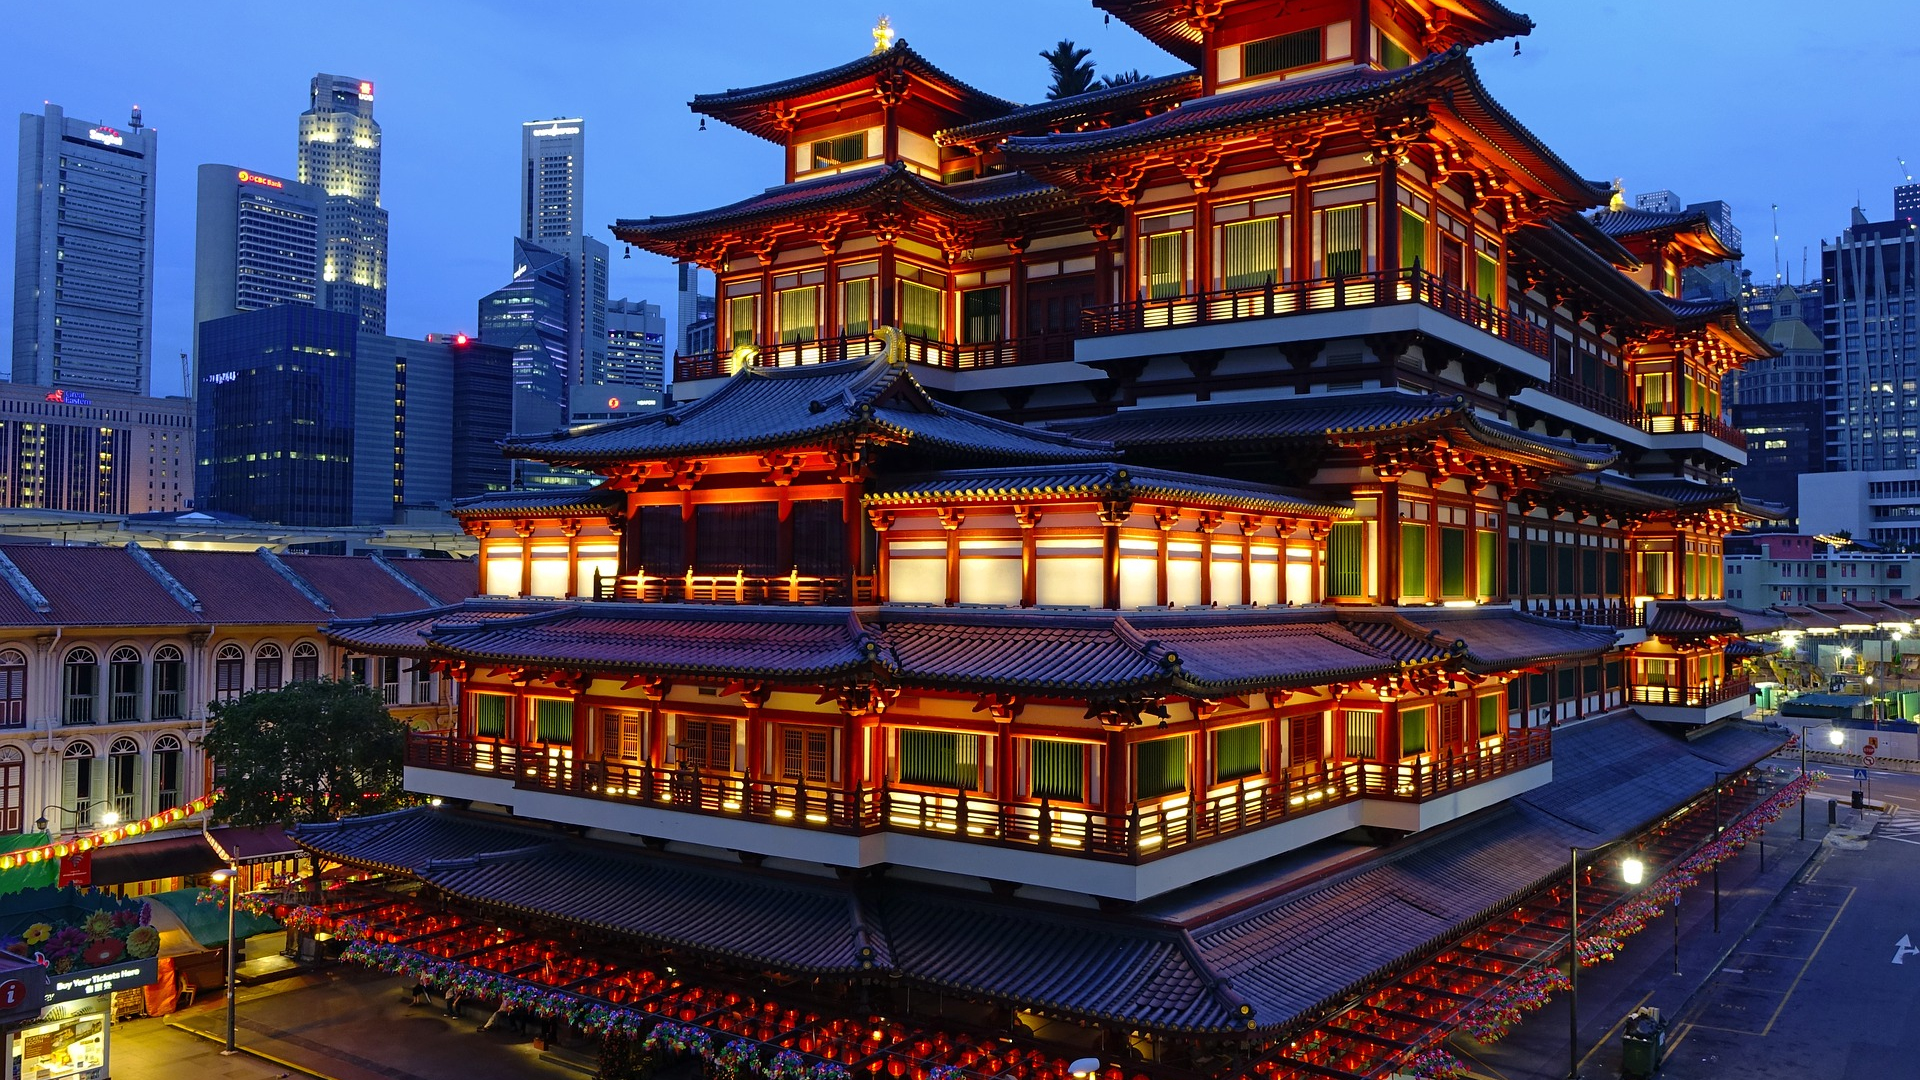 Download 1920x1080 Wallpaper Buddha Tooth Relic Temple, Singapore, Full Hd,  Hdtv, Fhd, 1080p, 1920x1080 Hd Image, Background, 7884